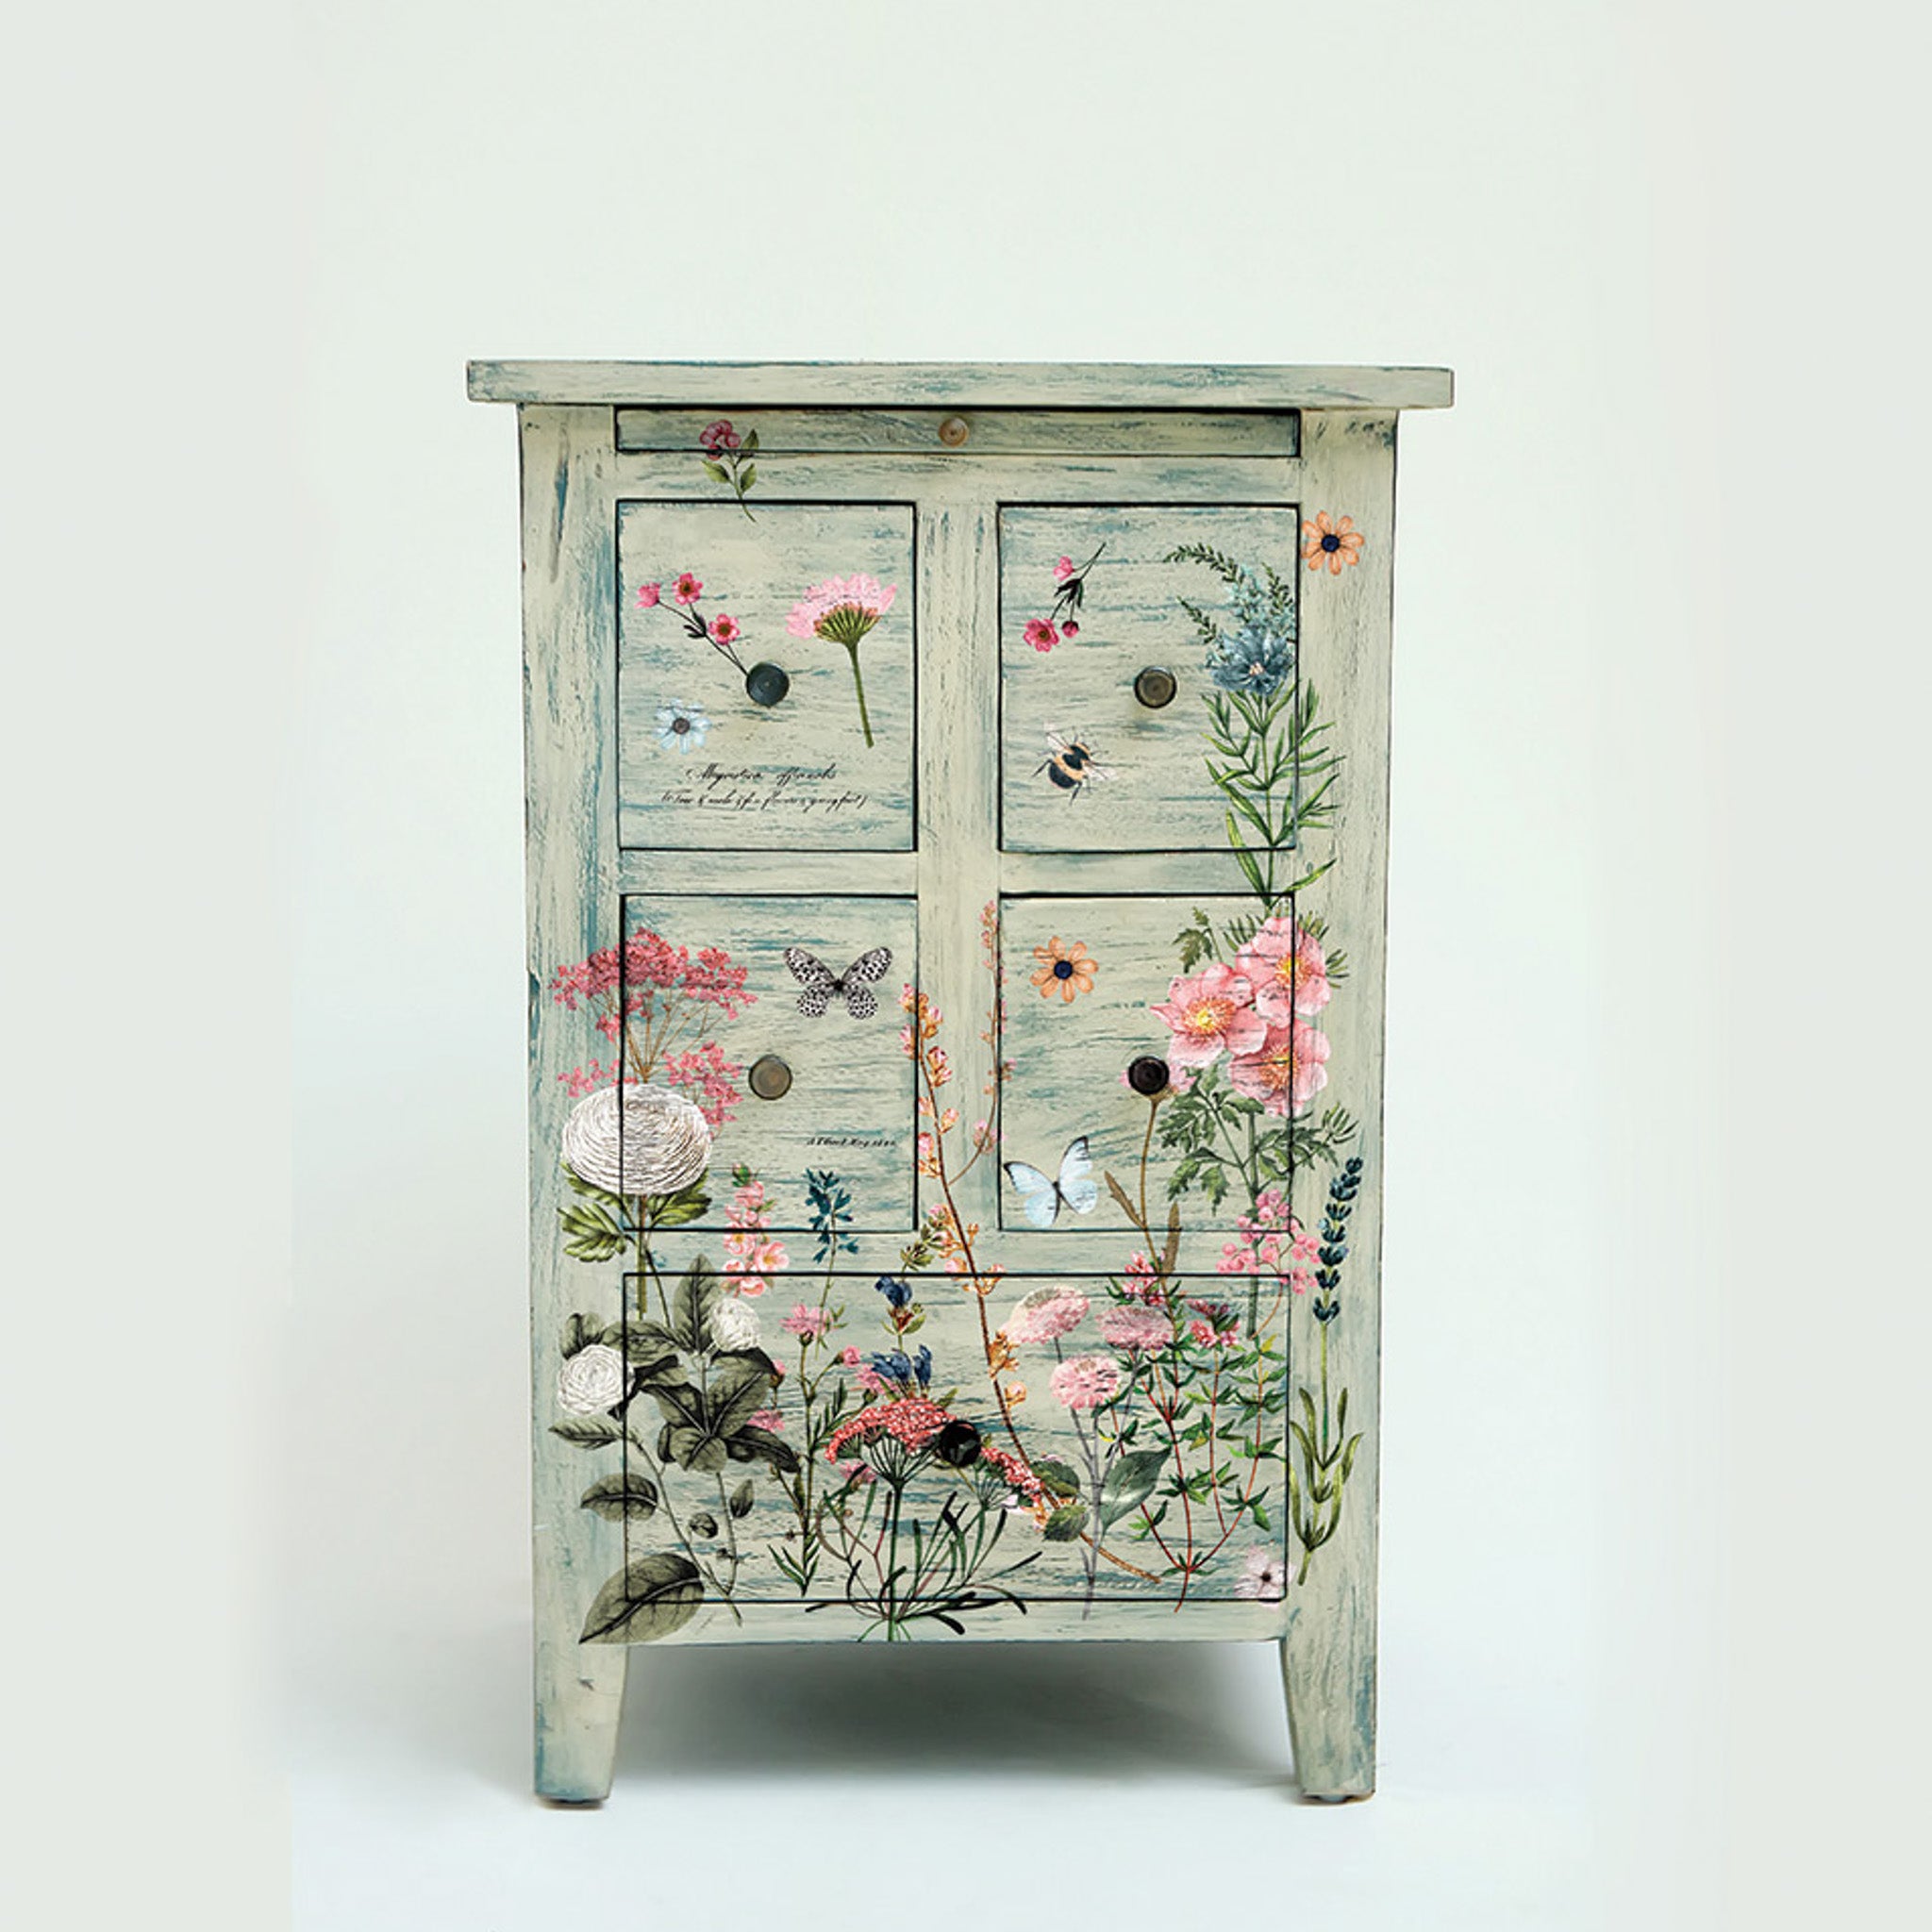 A small vintage nightstand with storage is painted cream with hints of blue weathering and features ReDesign with Prima's Botanical Paradise small rub-on transfer.